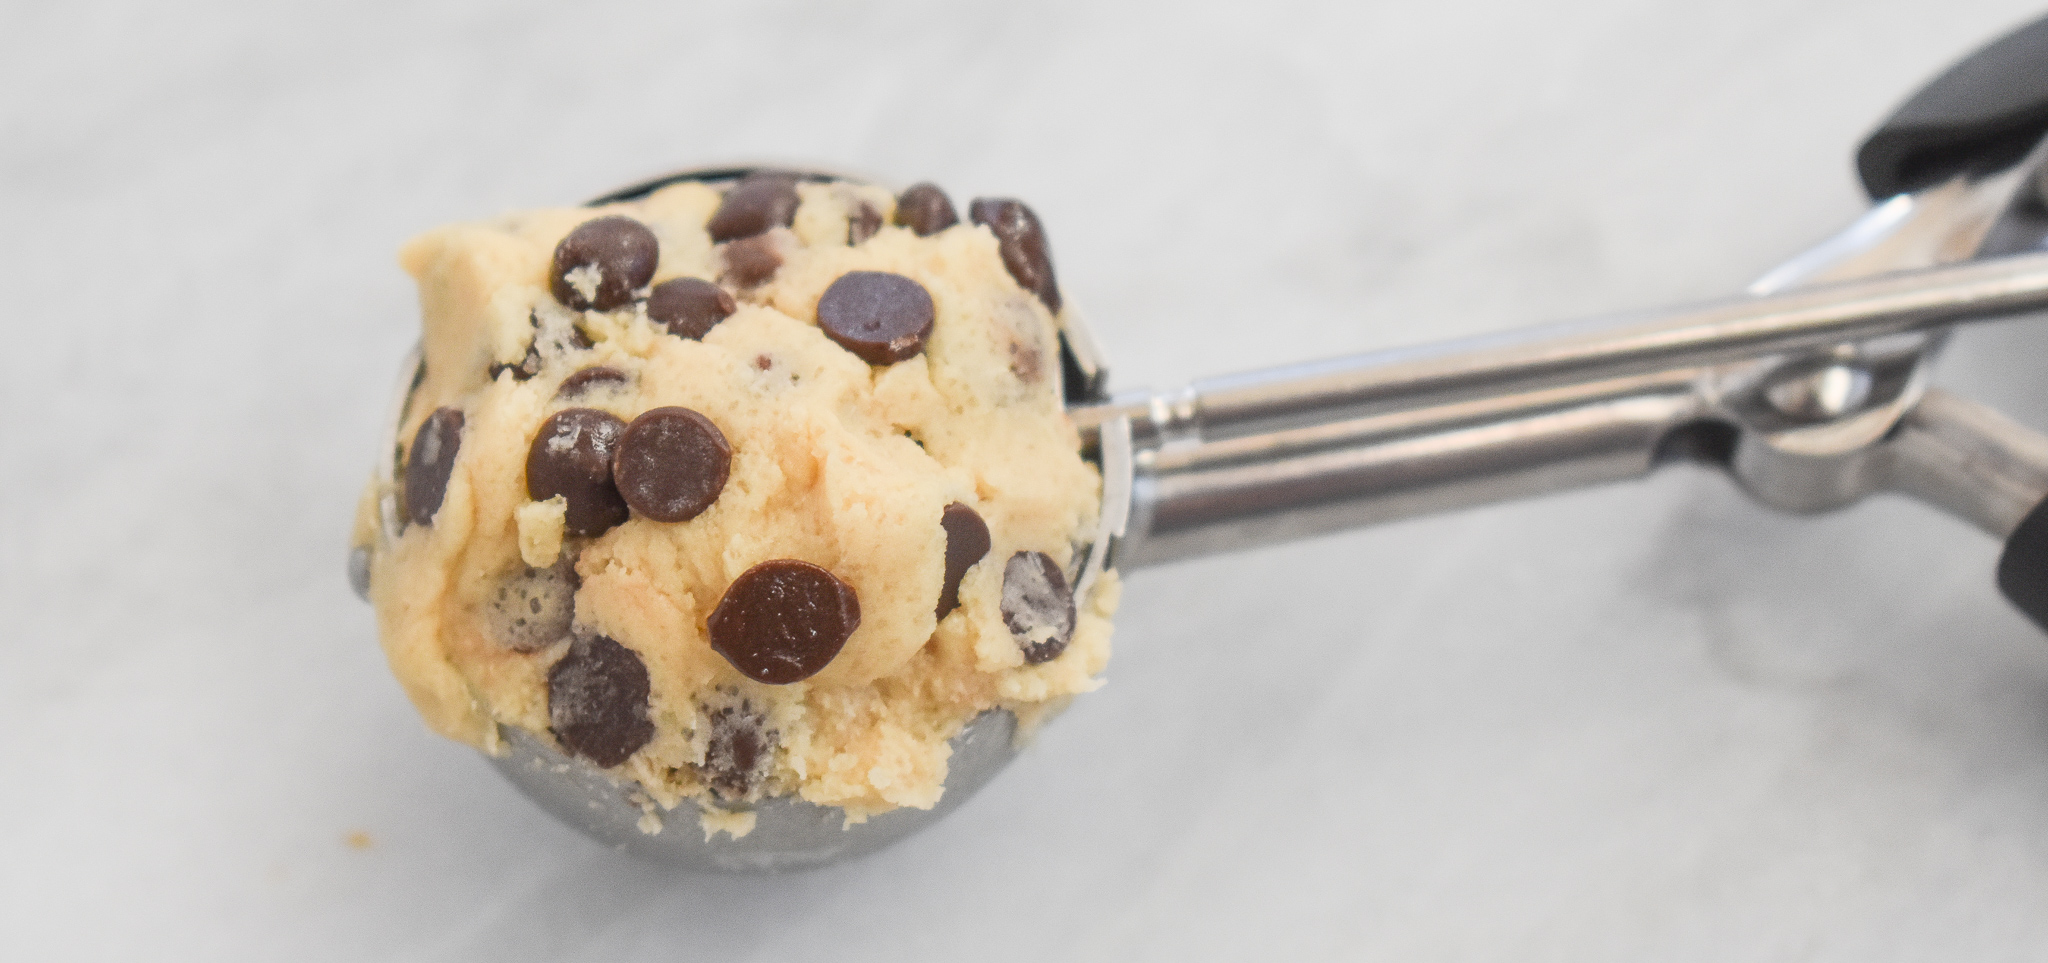 Edible Chocolate Chip Cookie Dough - My Happy Bakes